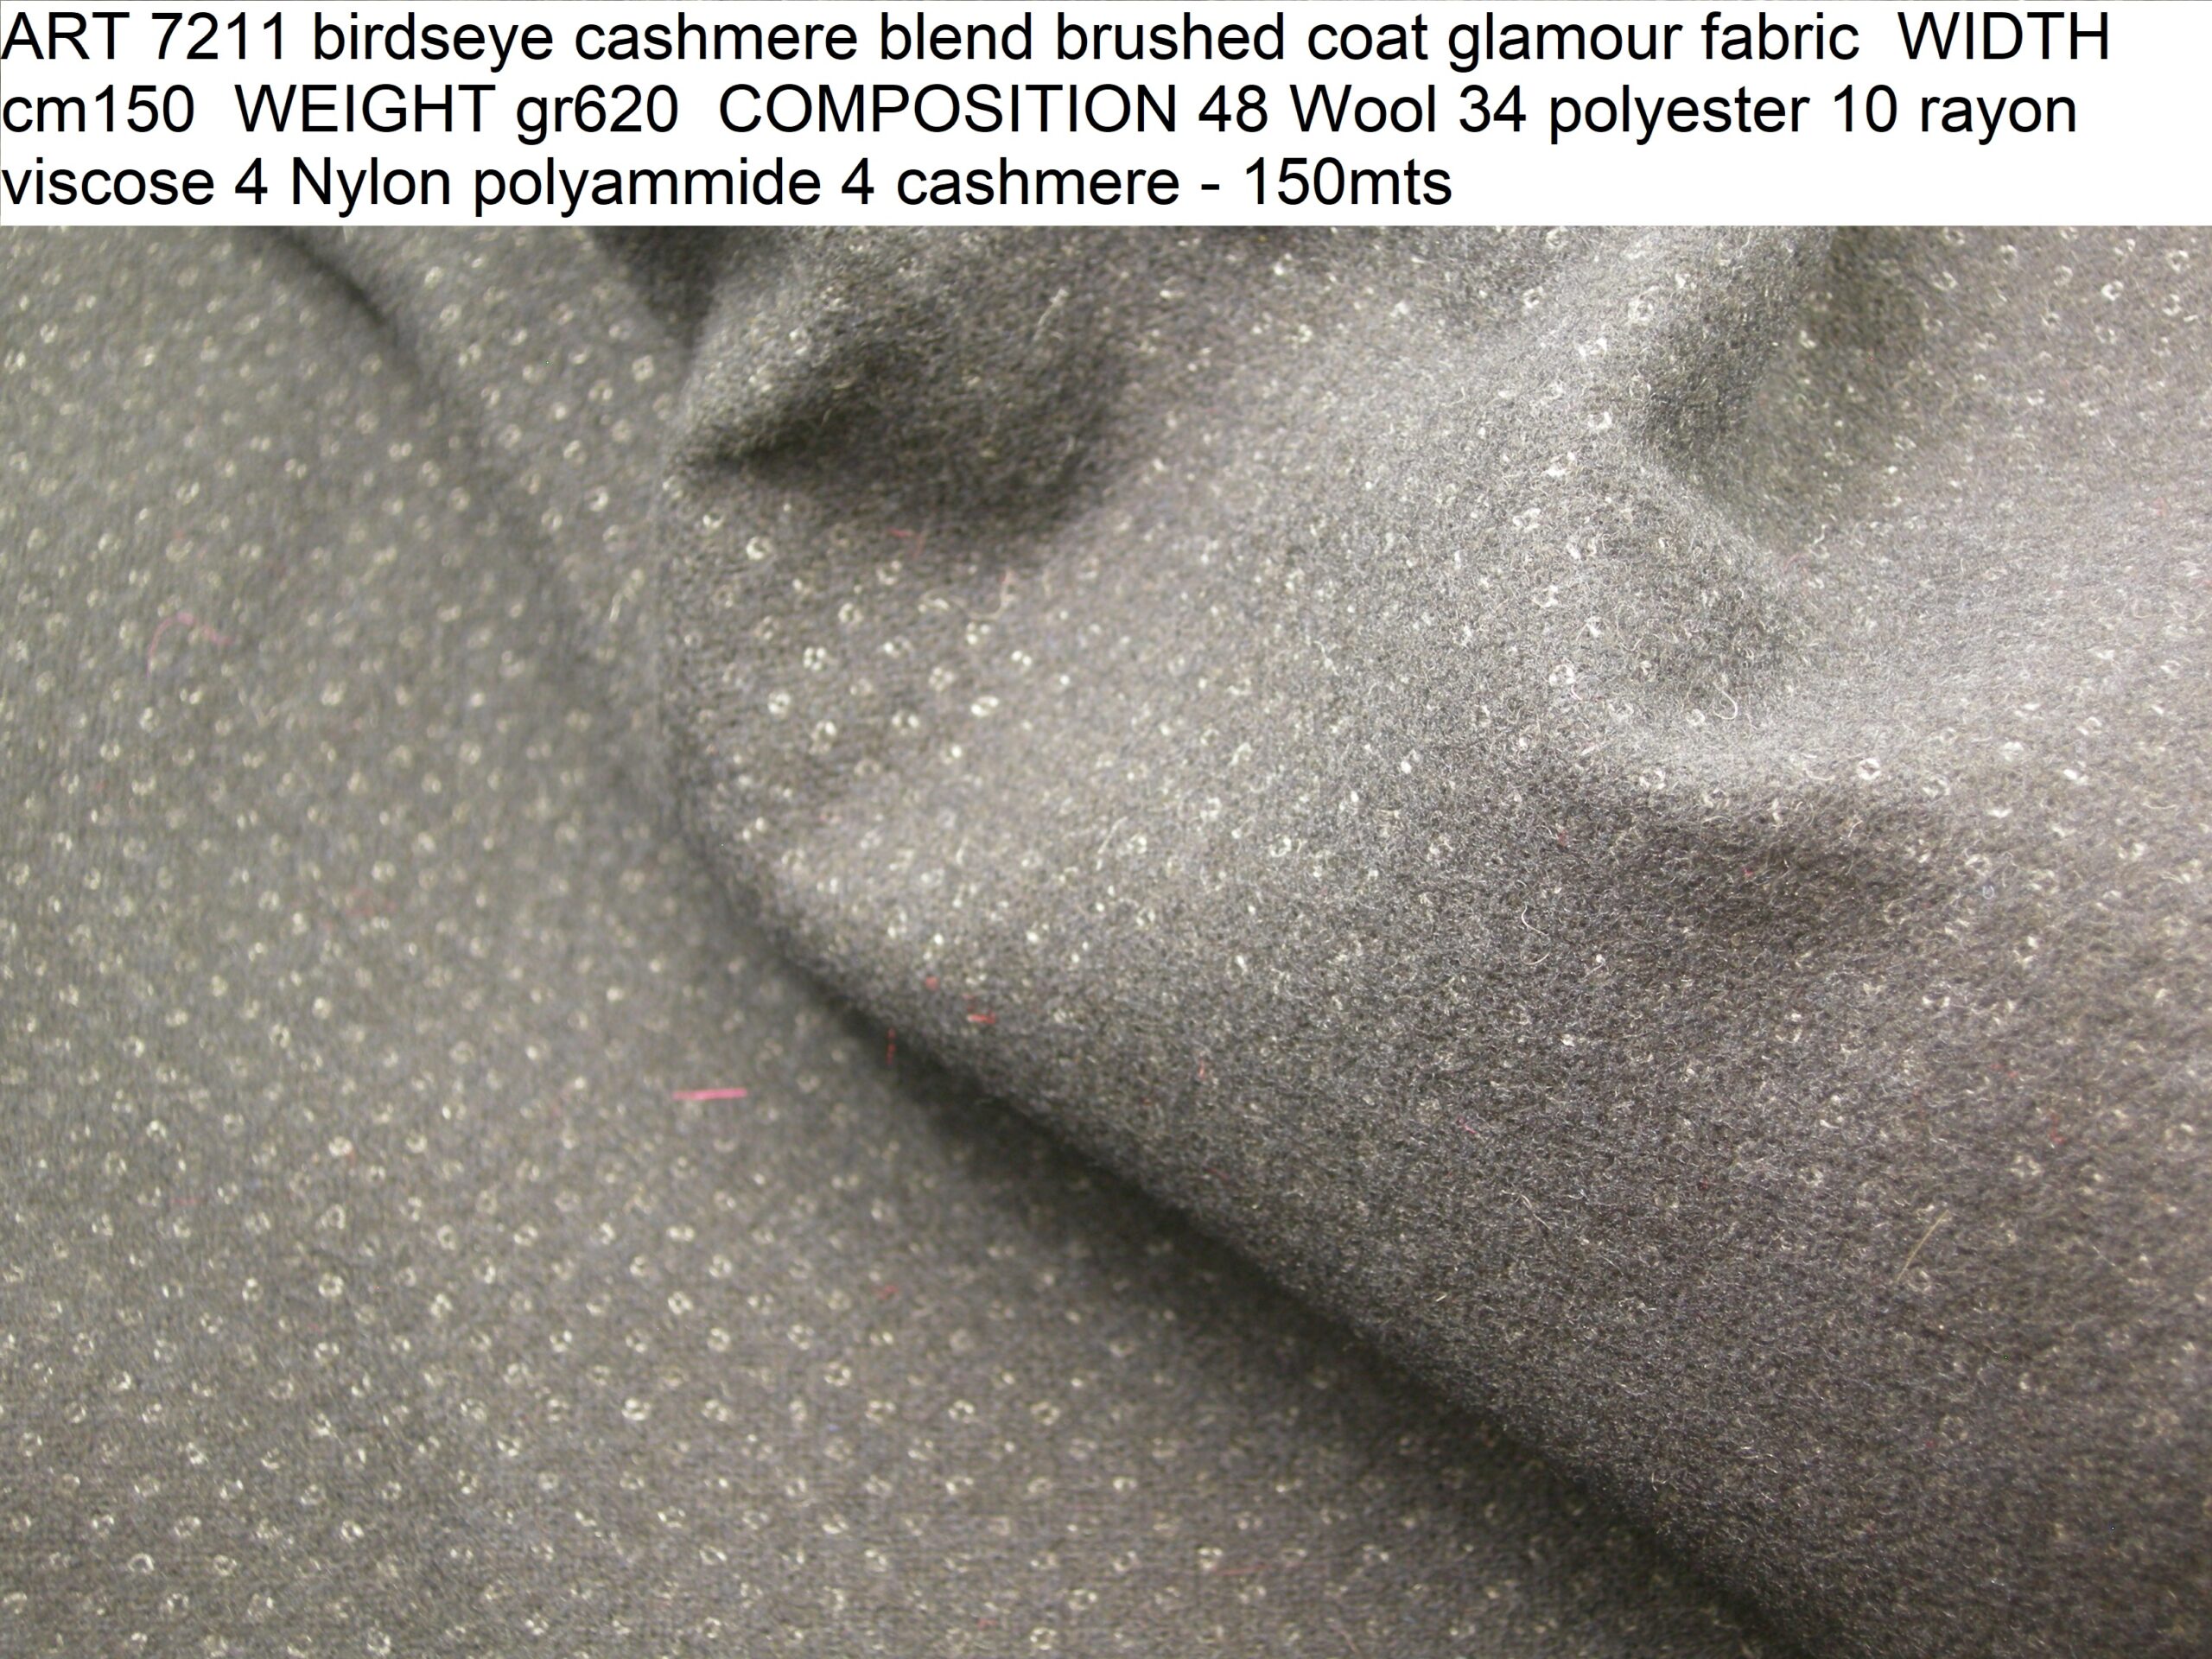 ART 7211 birdseye cashmere blend brushed coat glamour fabric WIDTH cm150 WEIGHT gr620 COMPOSITION 48 Wool 34 polyester 10 rayon viscose 4 Nylon polyammide 4 cashmere - 150mts